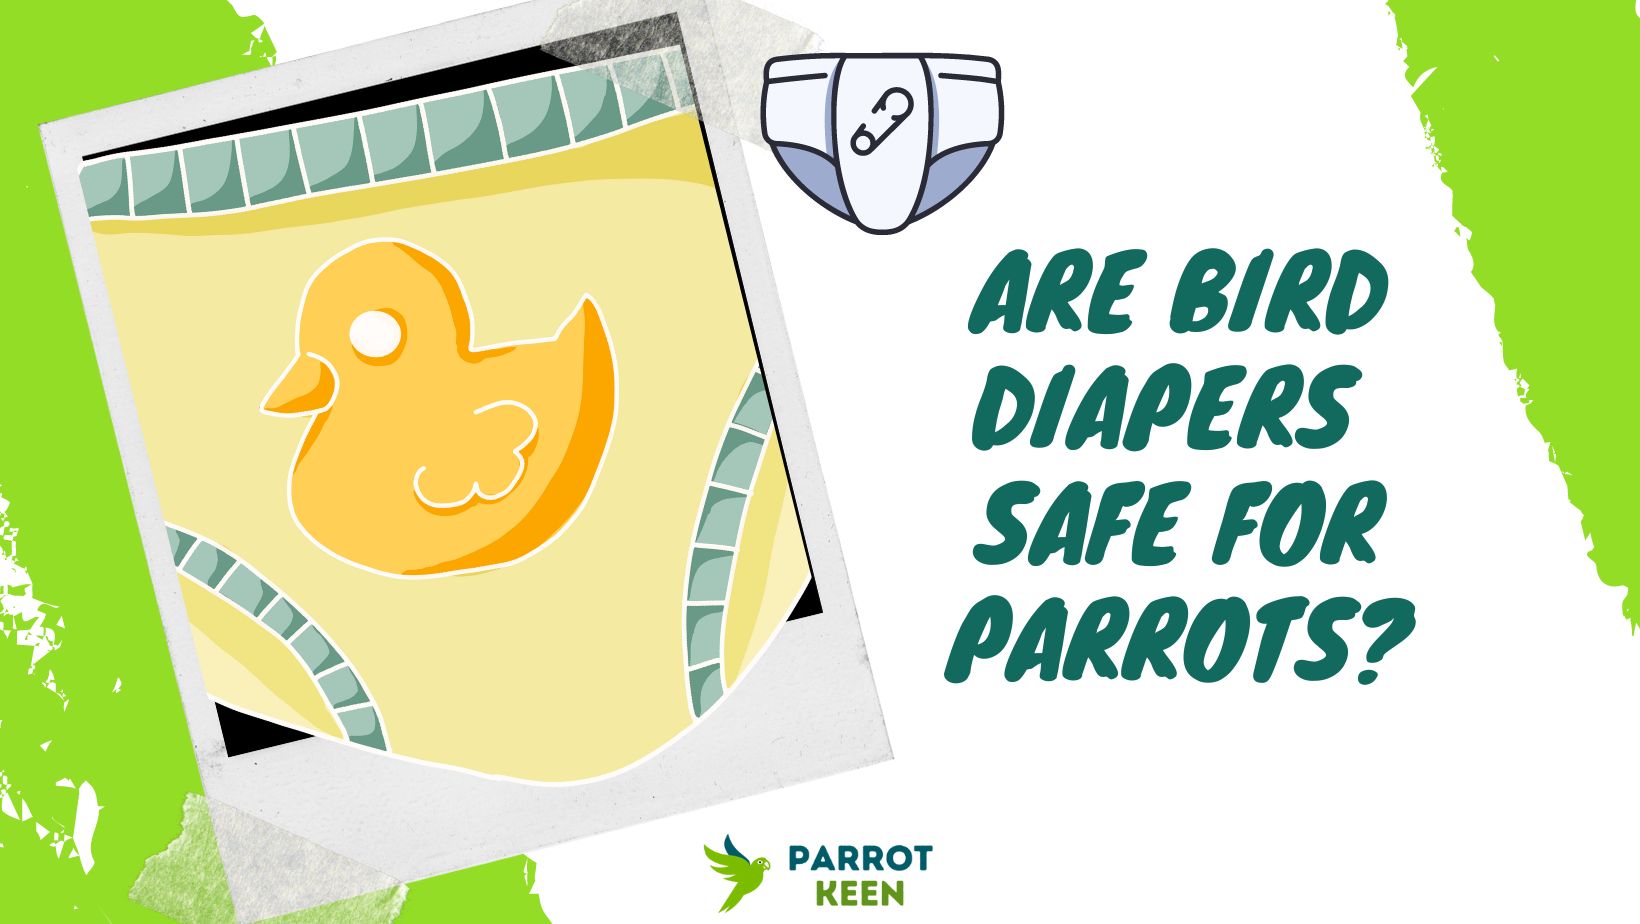 Are Bird Diapers Safe for Parrots